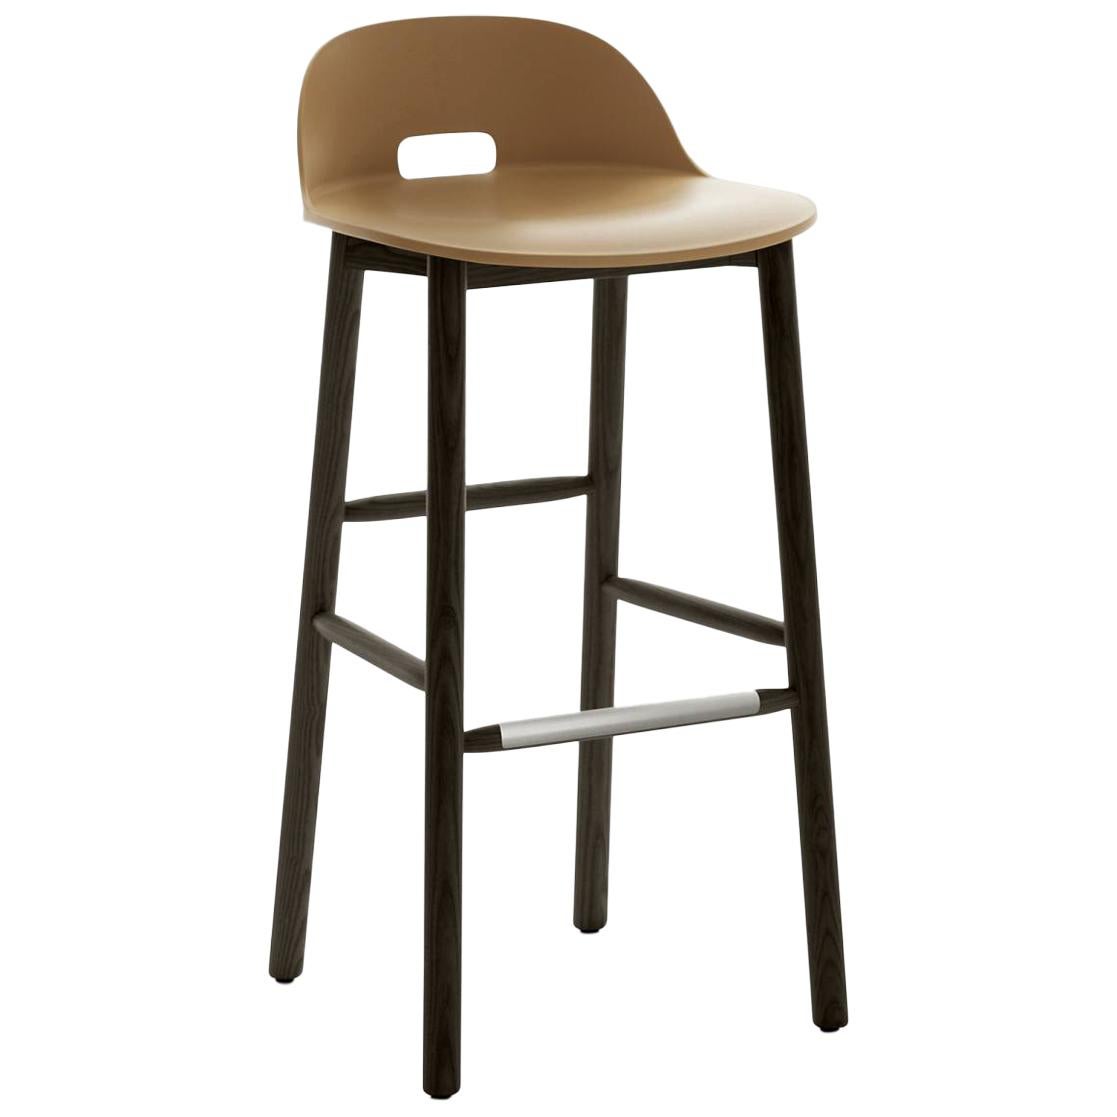 Emeco Alfi Barstool in Sand and Dark Ash with Low Back by Jasper Morrison For Sale